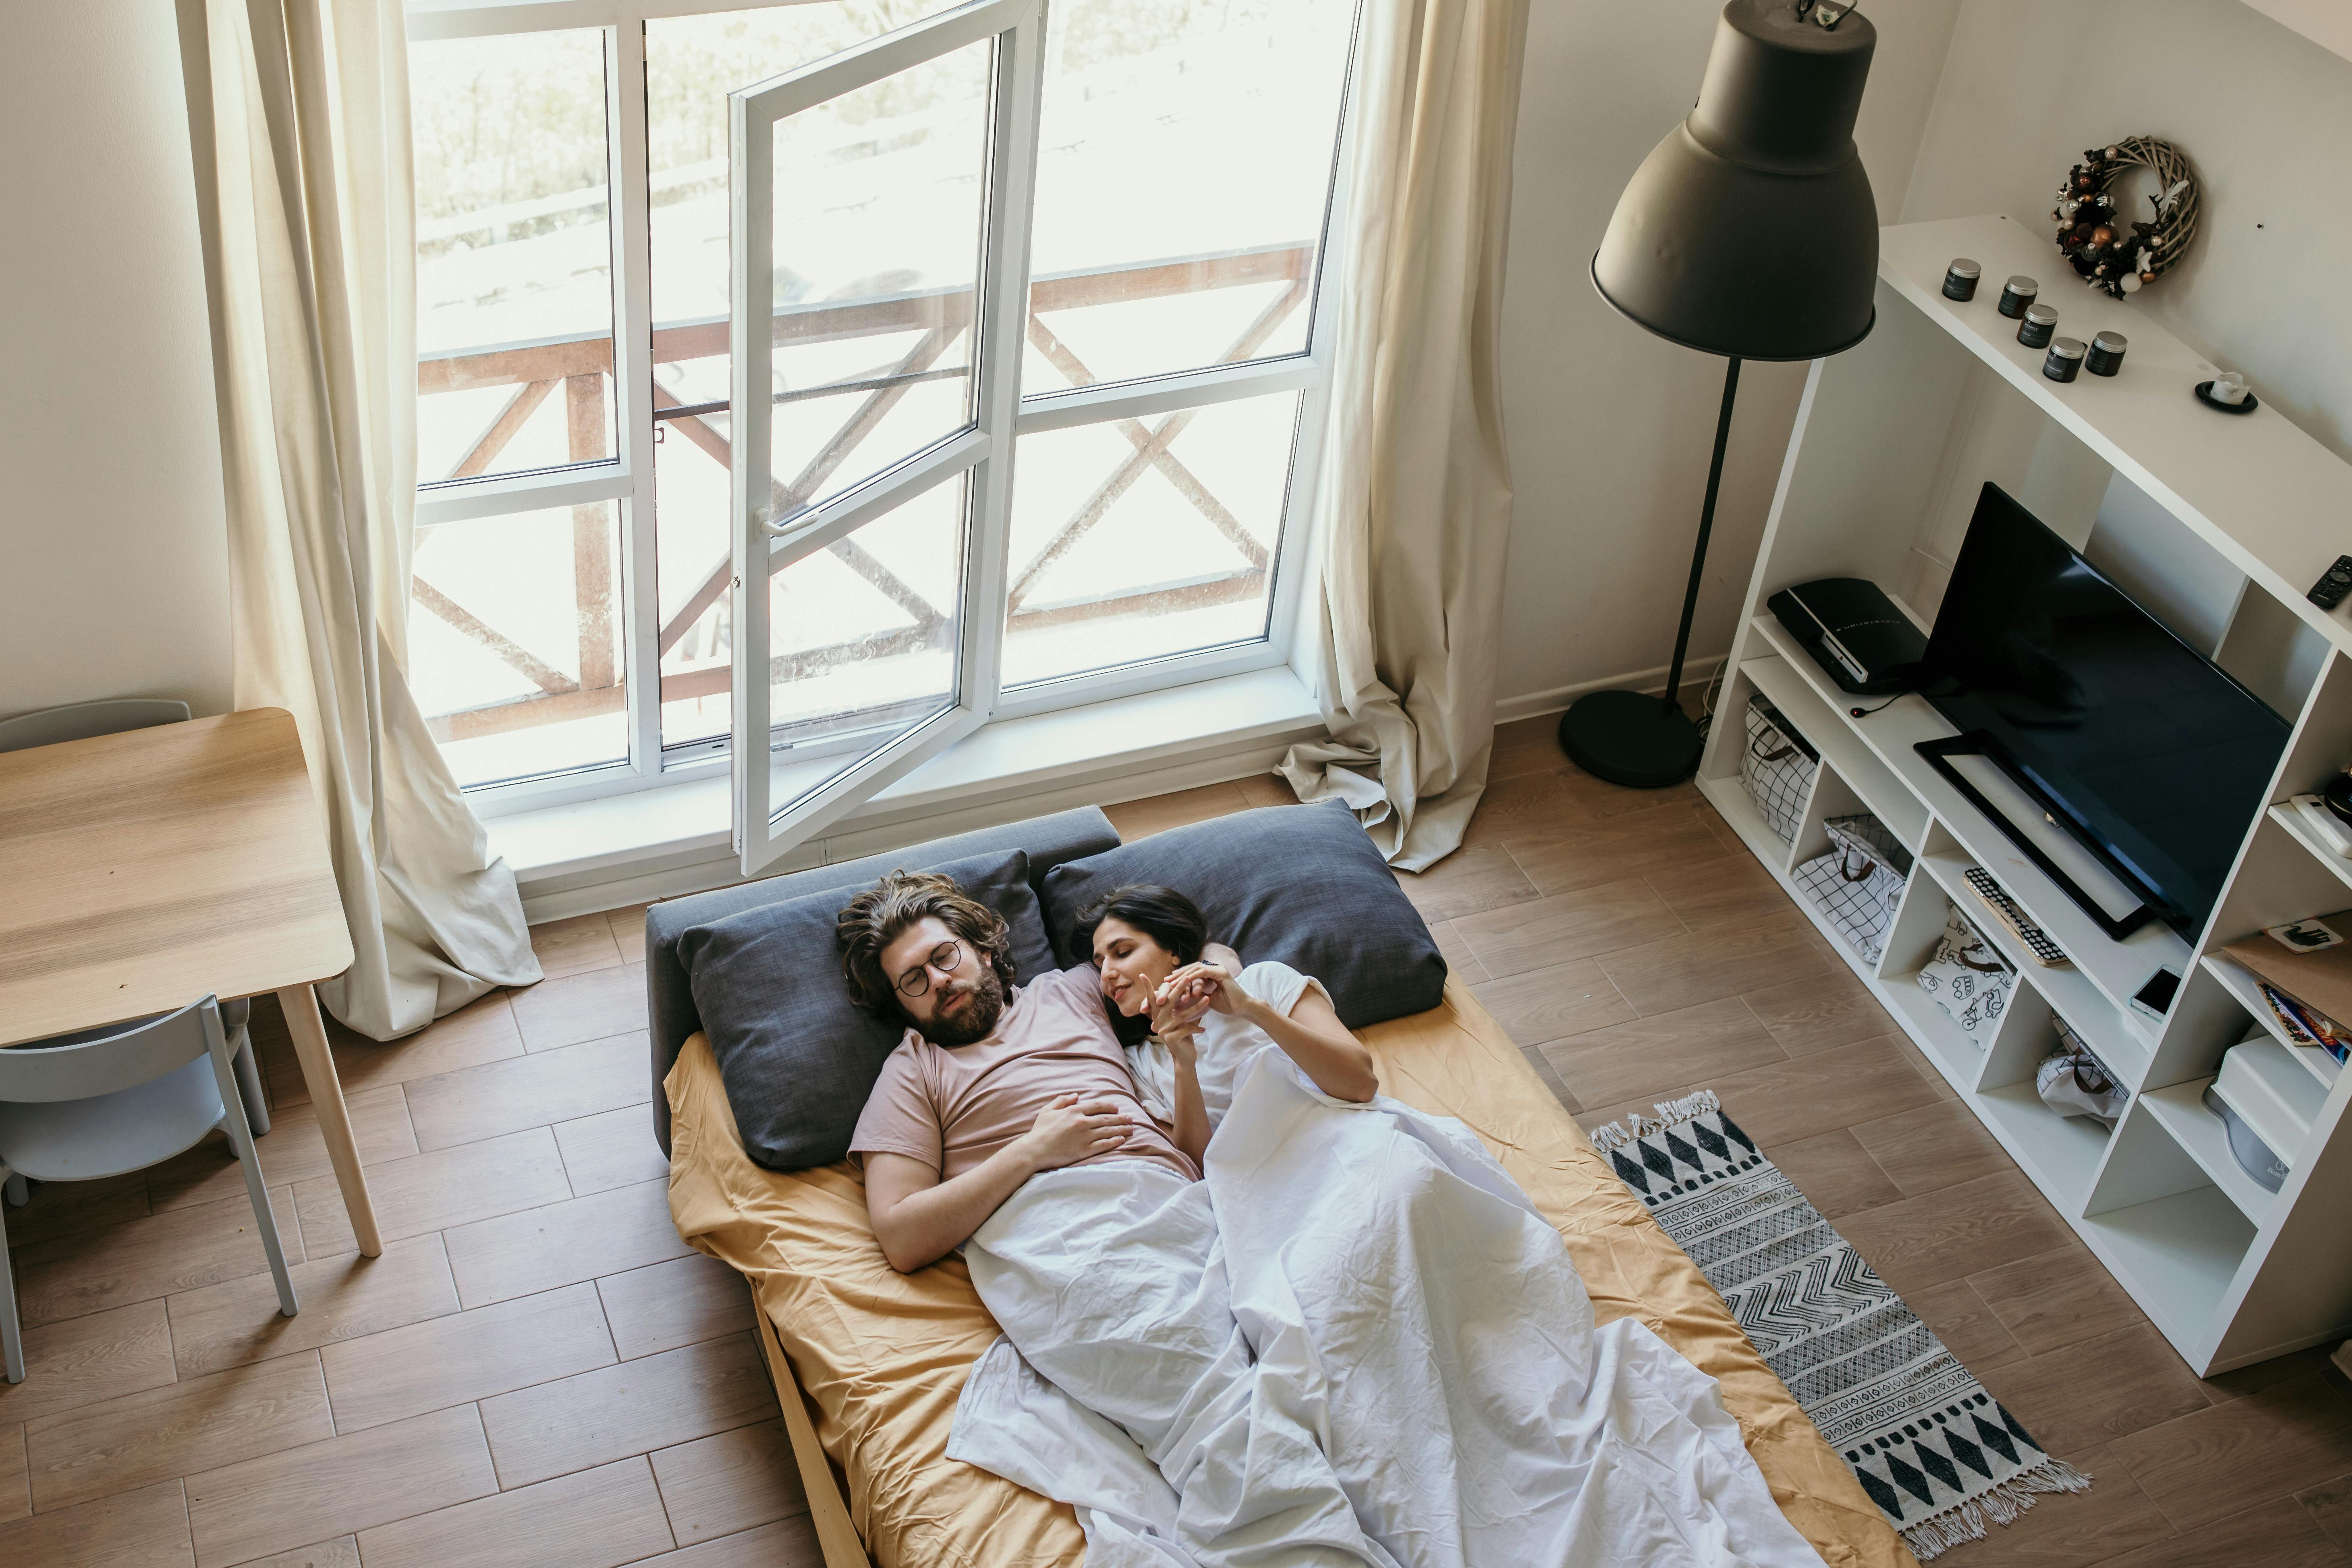 Man and woman lying on bed. | Photo: Pexels